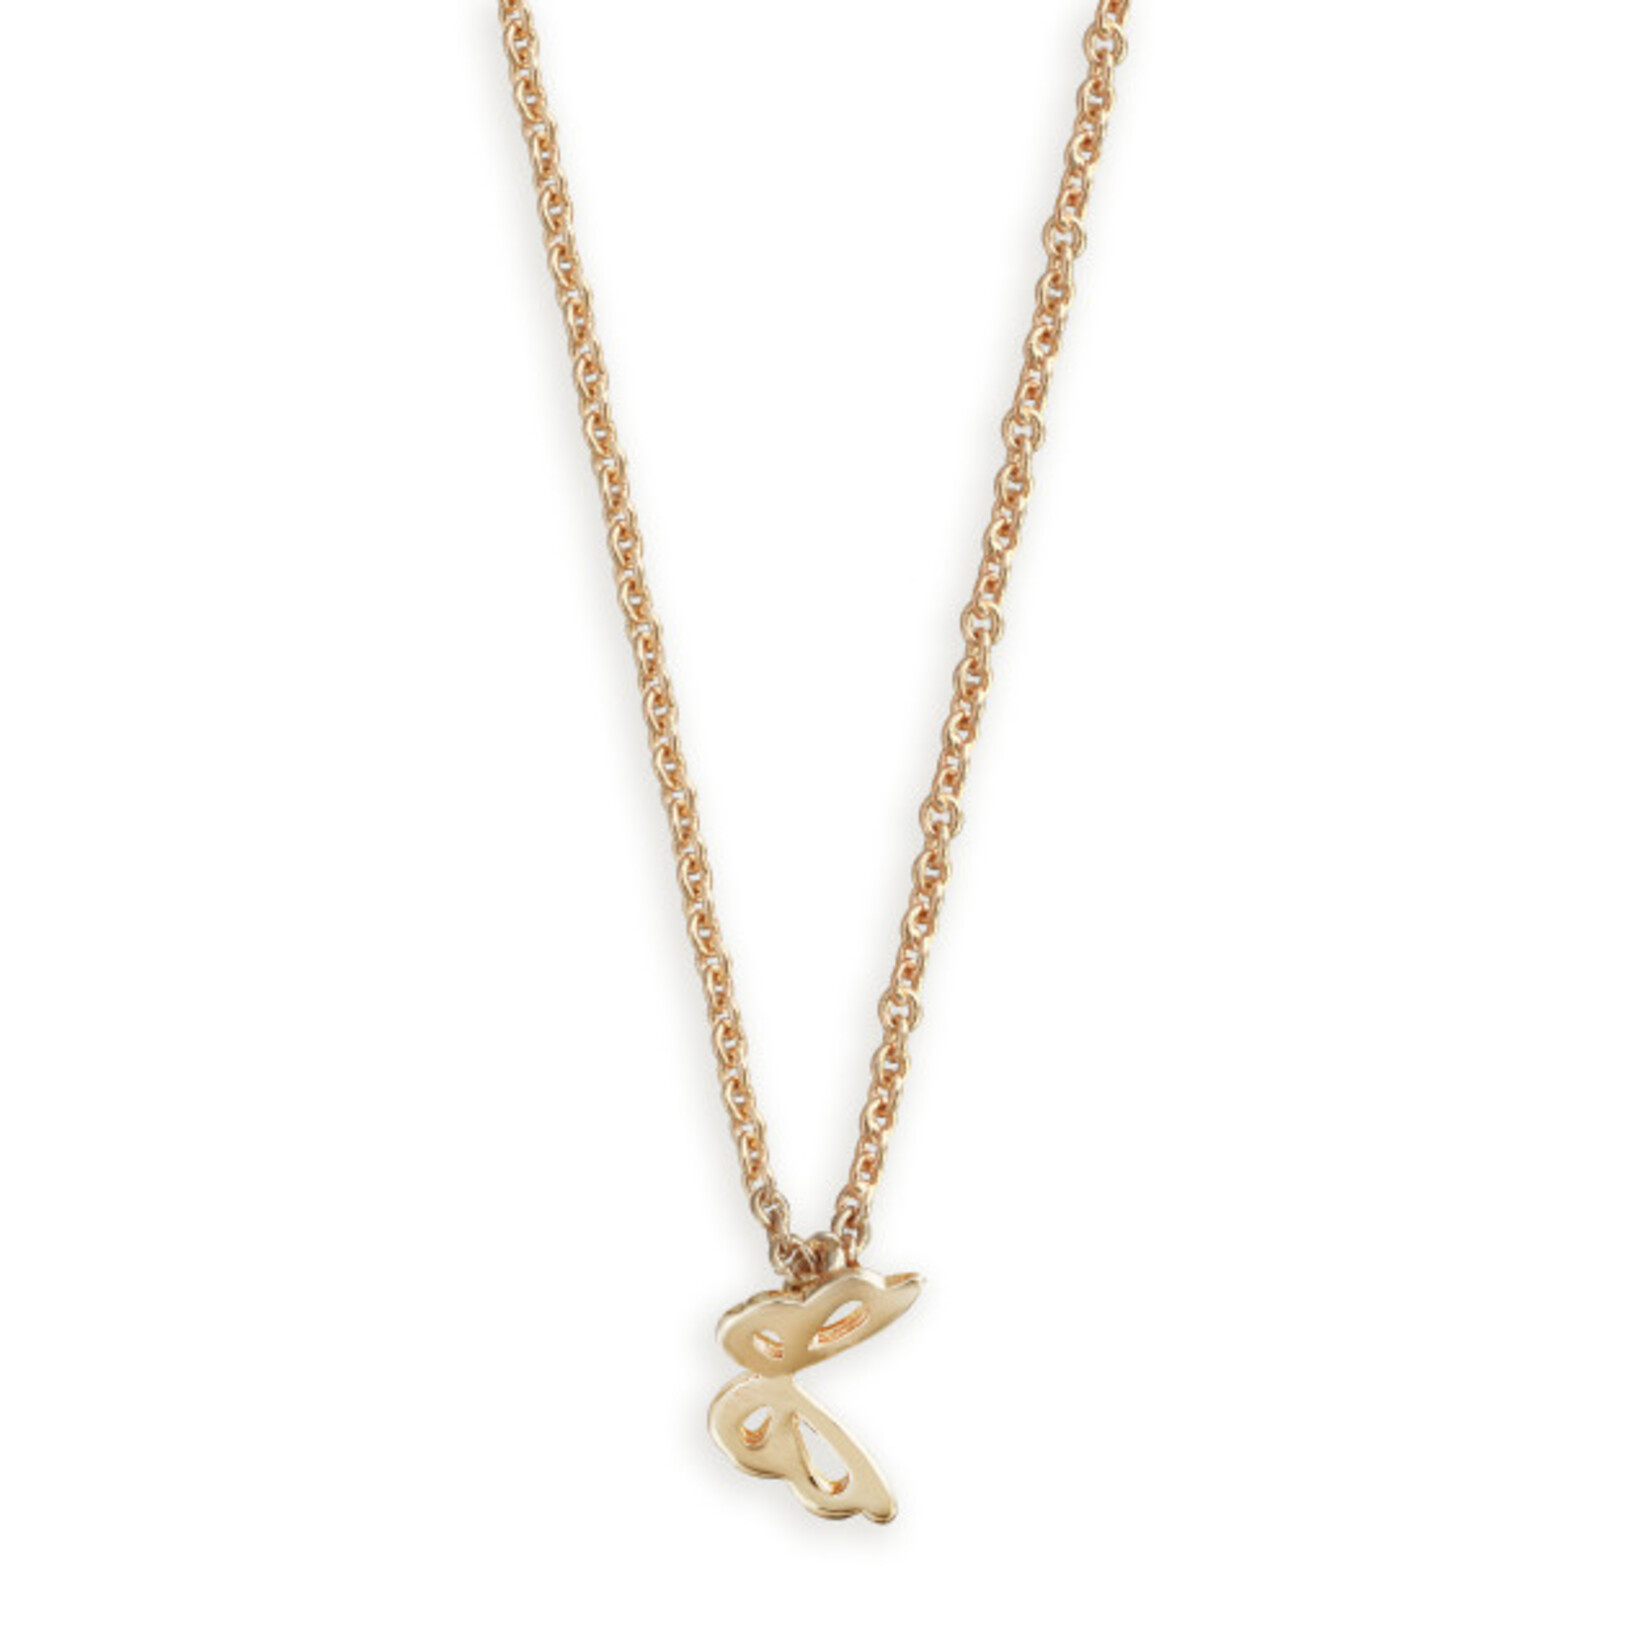 Demdaco Simply Believe Necklace with Gold Butterfly Pendant